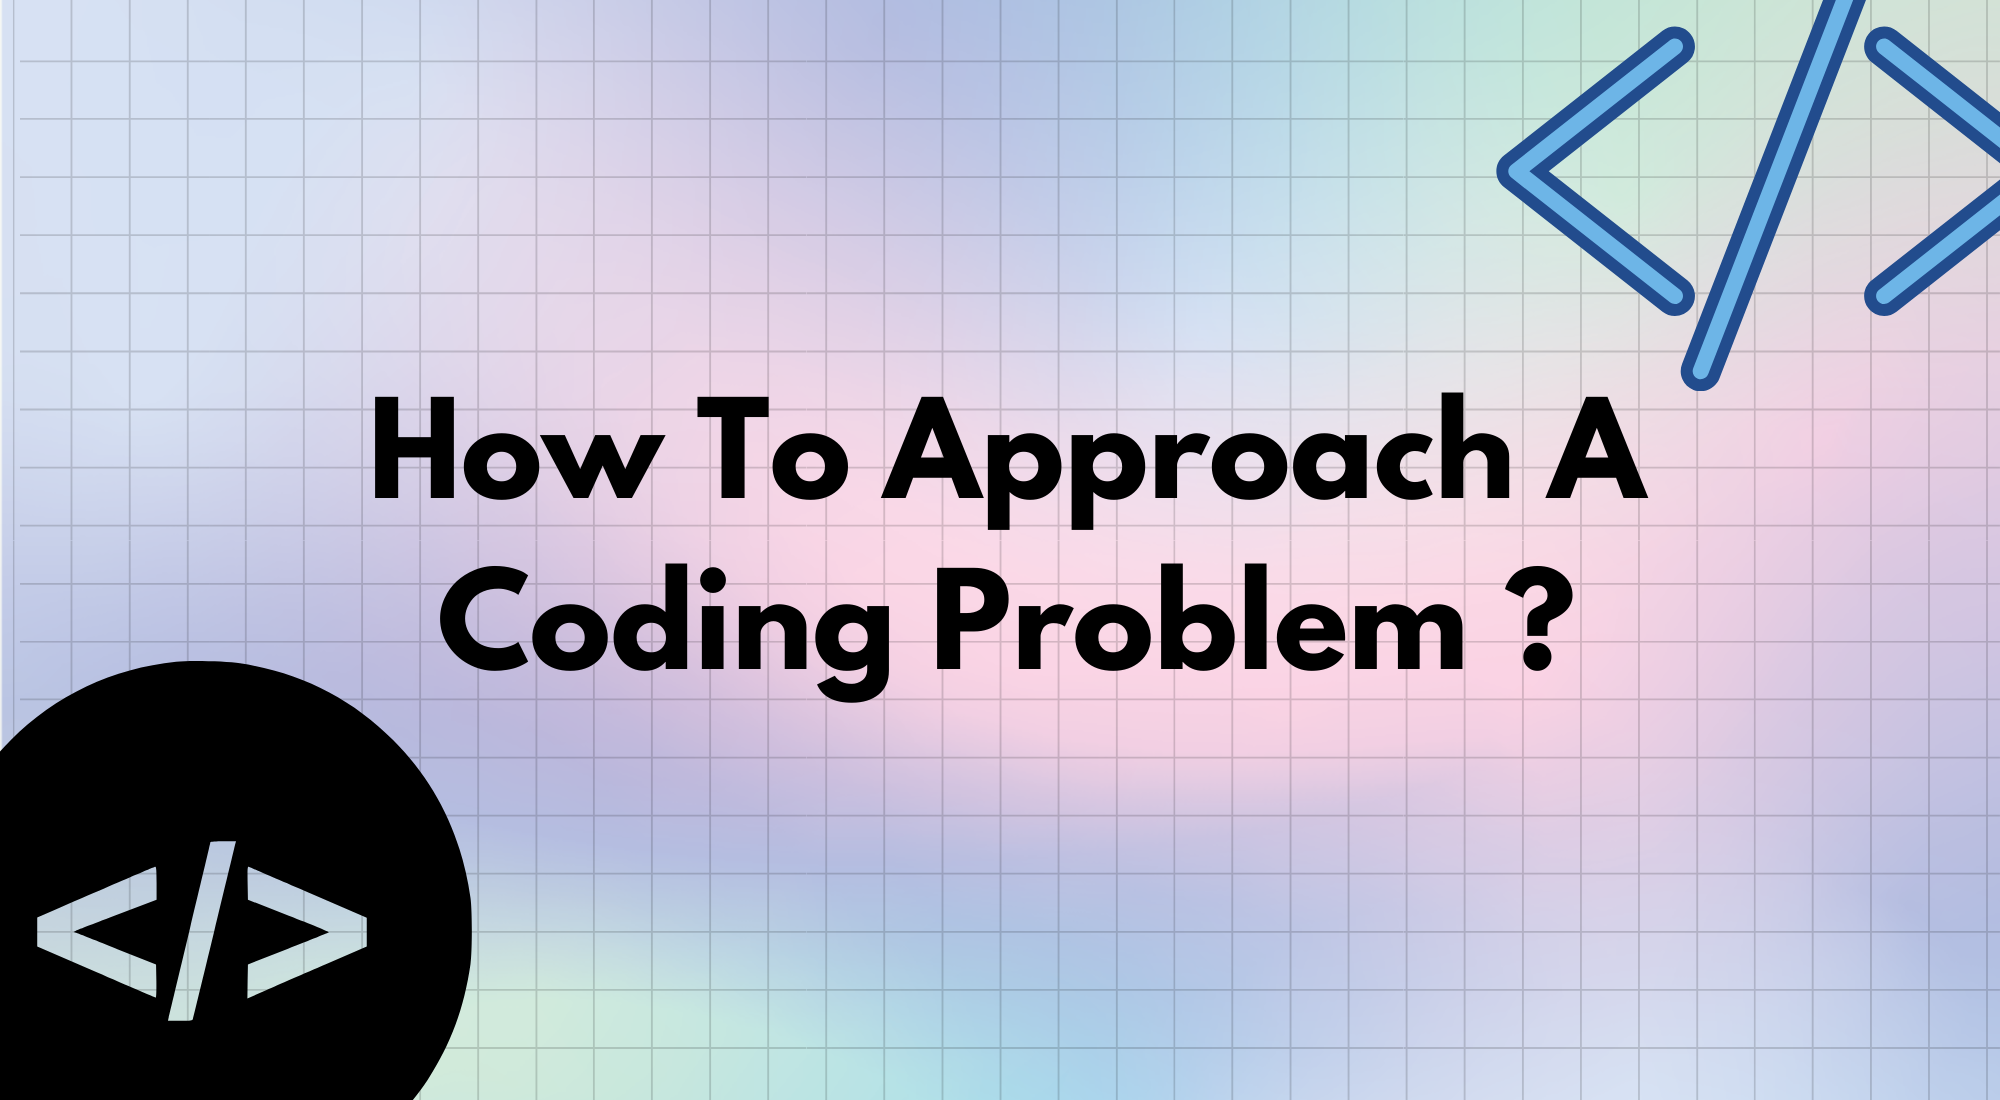 How to solve a coding problem